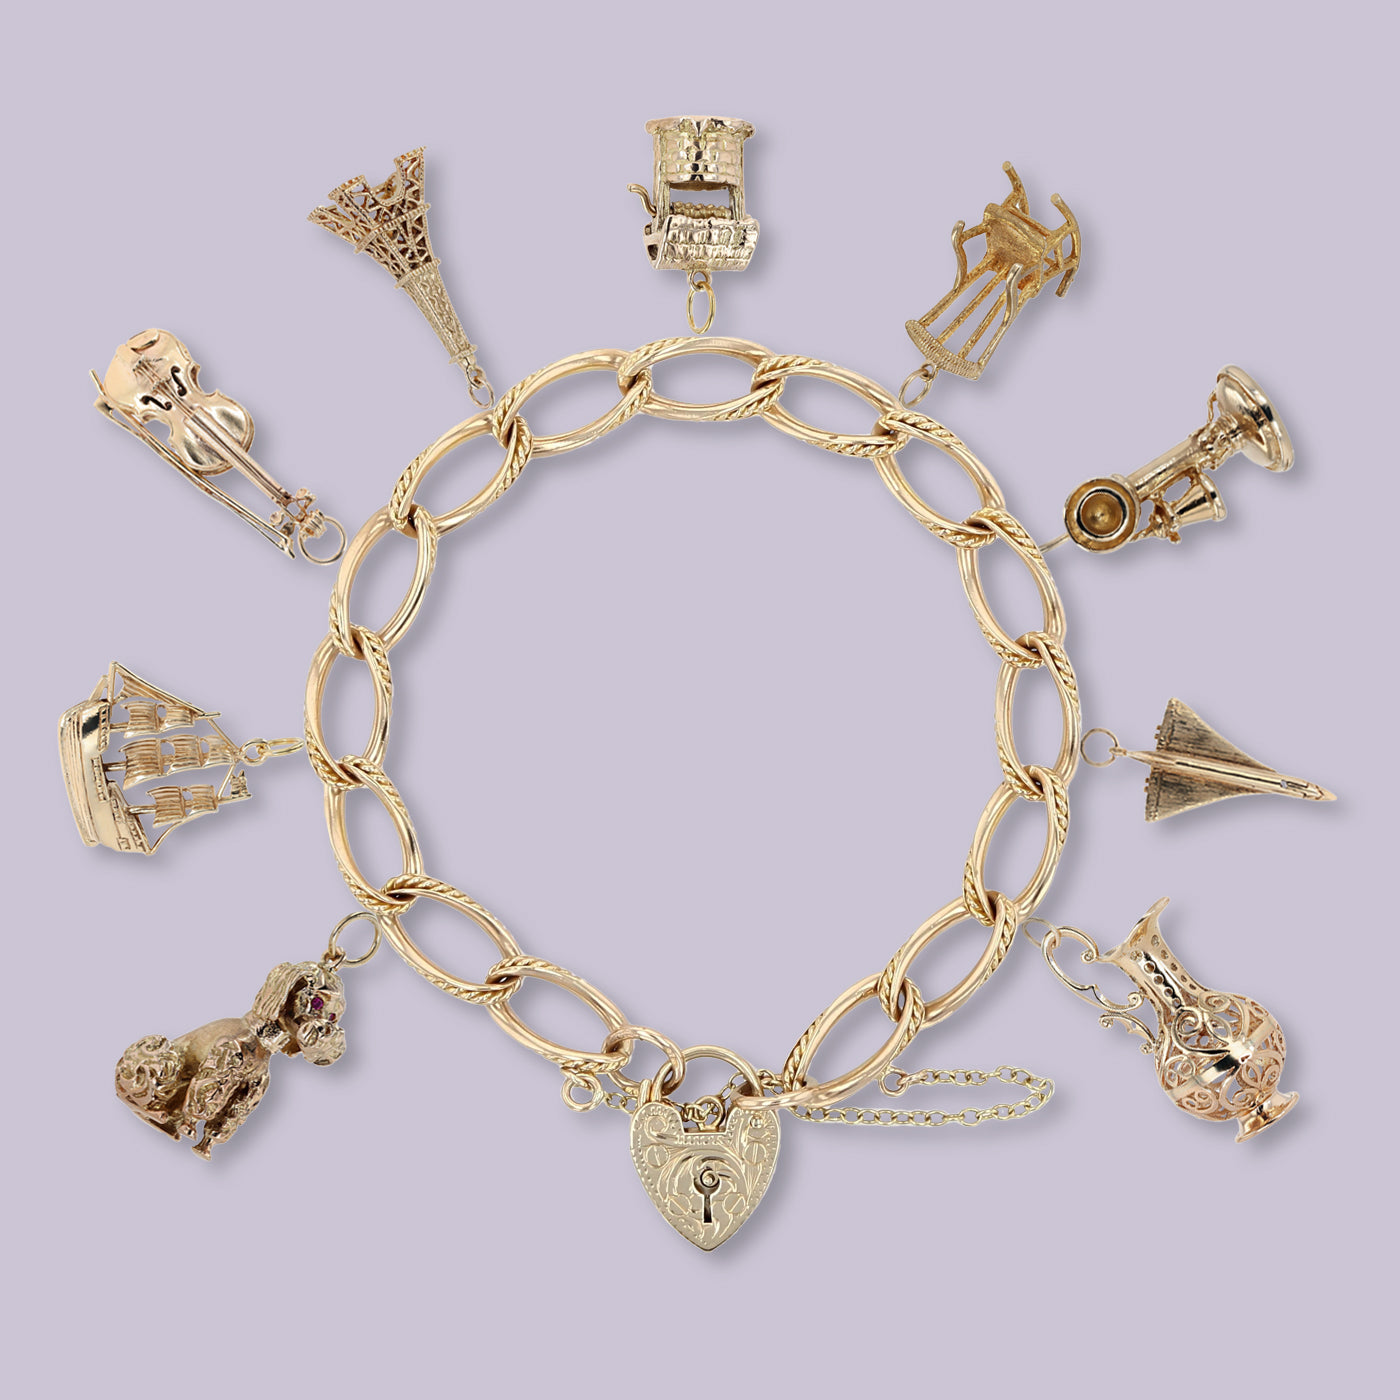 9ct Yellow Gold Fancy Link Charm Bracelet with Charms.